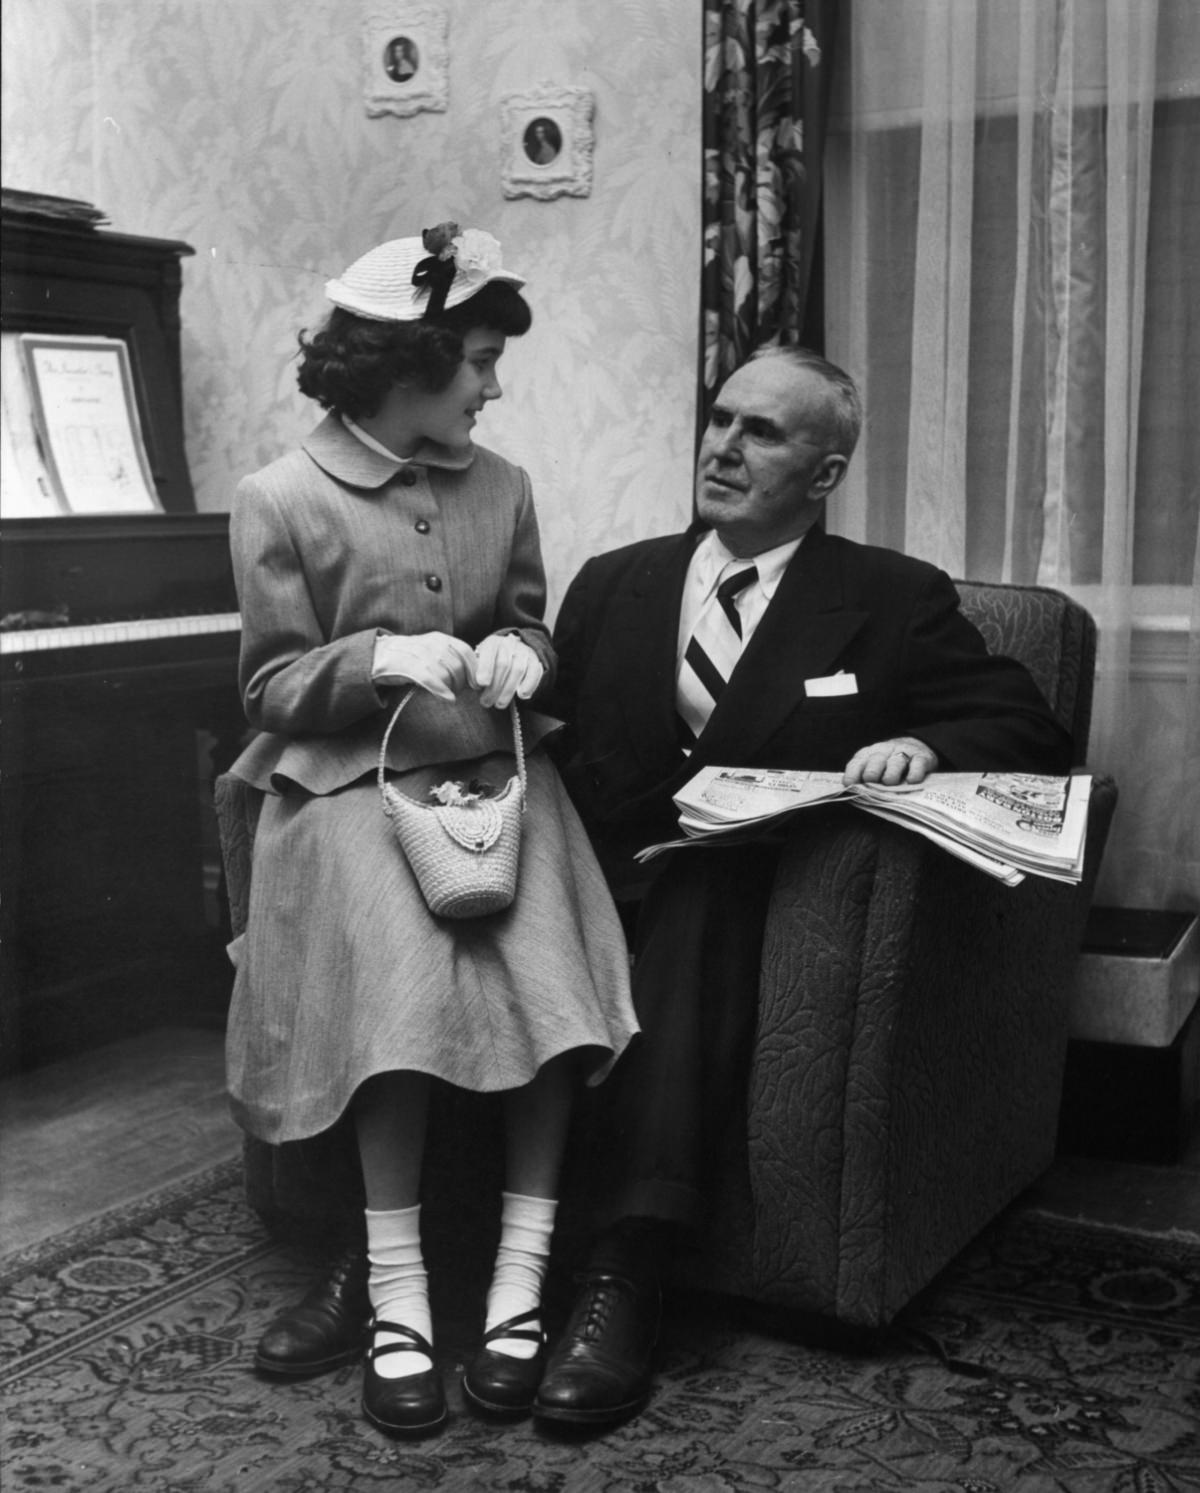 Daniel O’Neil with one of his ten daughters in a new Easter outfit, April 1952.